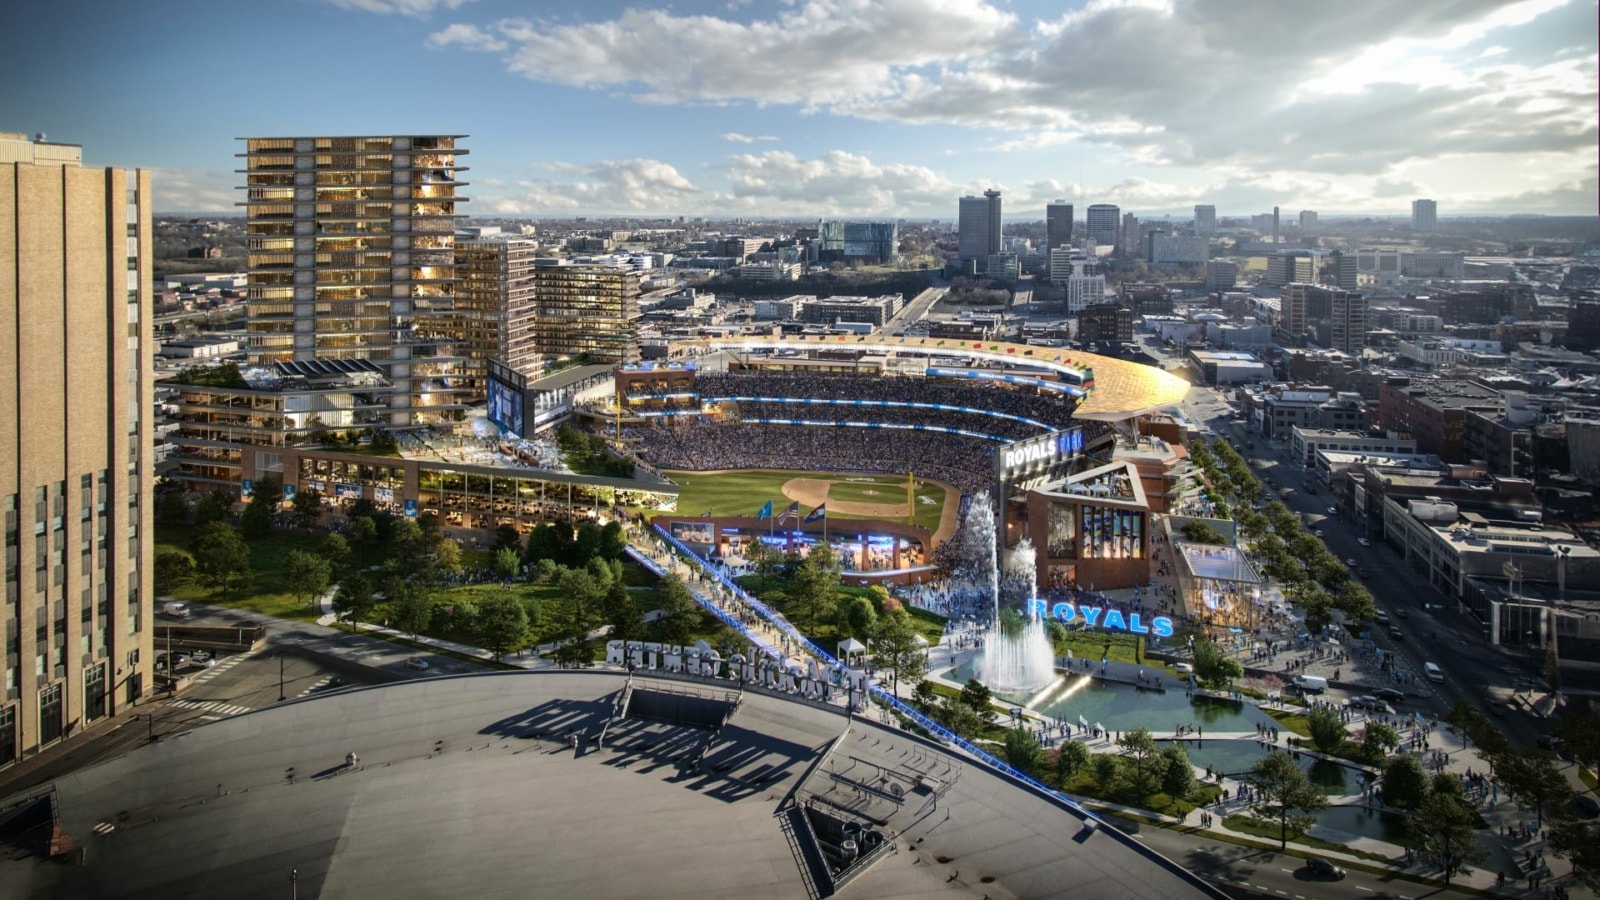 A view looking south from the proposed Kansas City Royals ballpark to the Crossroads and Crown Center.